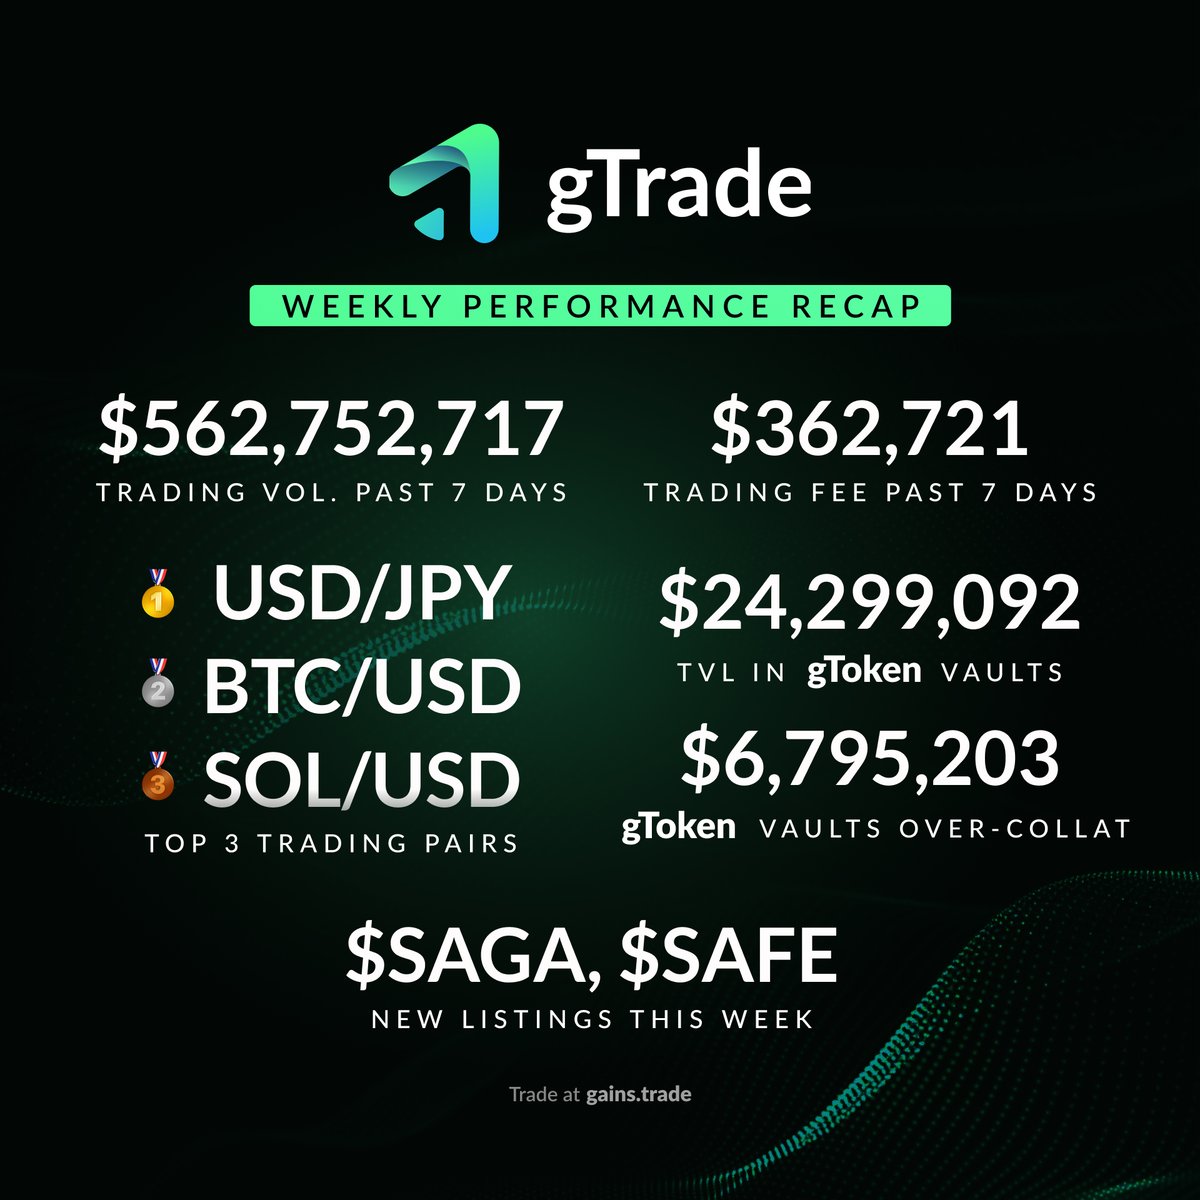 This Week on #gTrade 📈 $562M Traded in 7 Days 💰 $362K in Trading Fees 🔥 Top Pairs: USD/JPY, BTC/USD, SOL/USD 🏦 $24.3M Total Value Locked in our Vaults 💵 gToken Overcollateral at $6.8M ⭐️ PLUS: We’ve listed $SAGA, $SAFE Trade at gains.trade